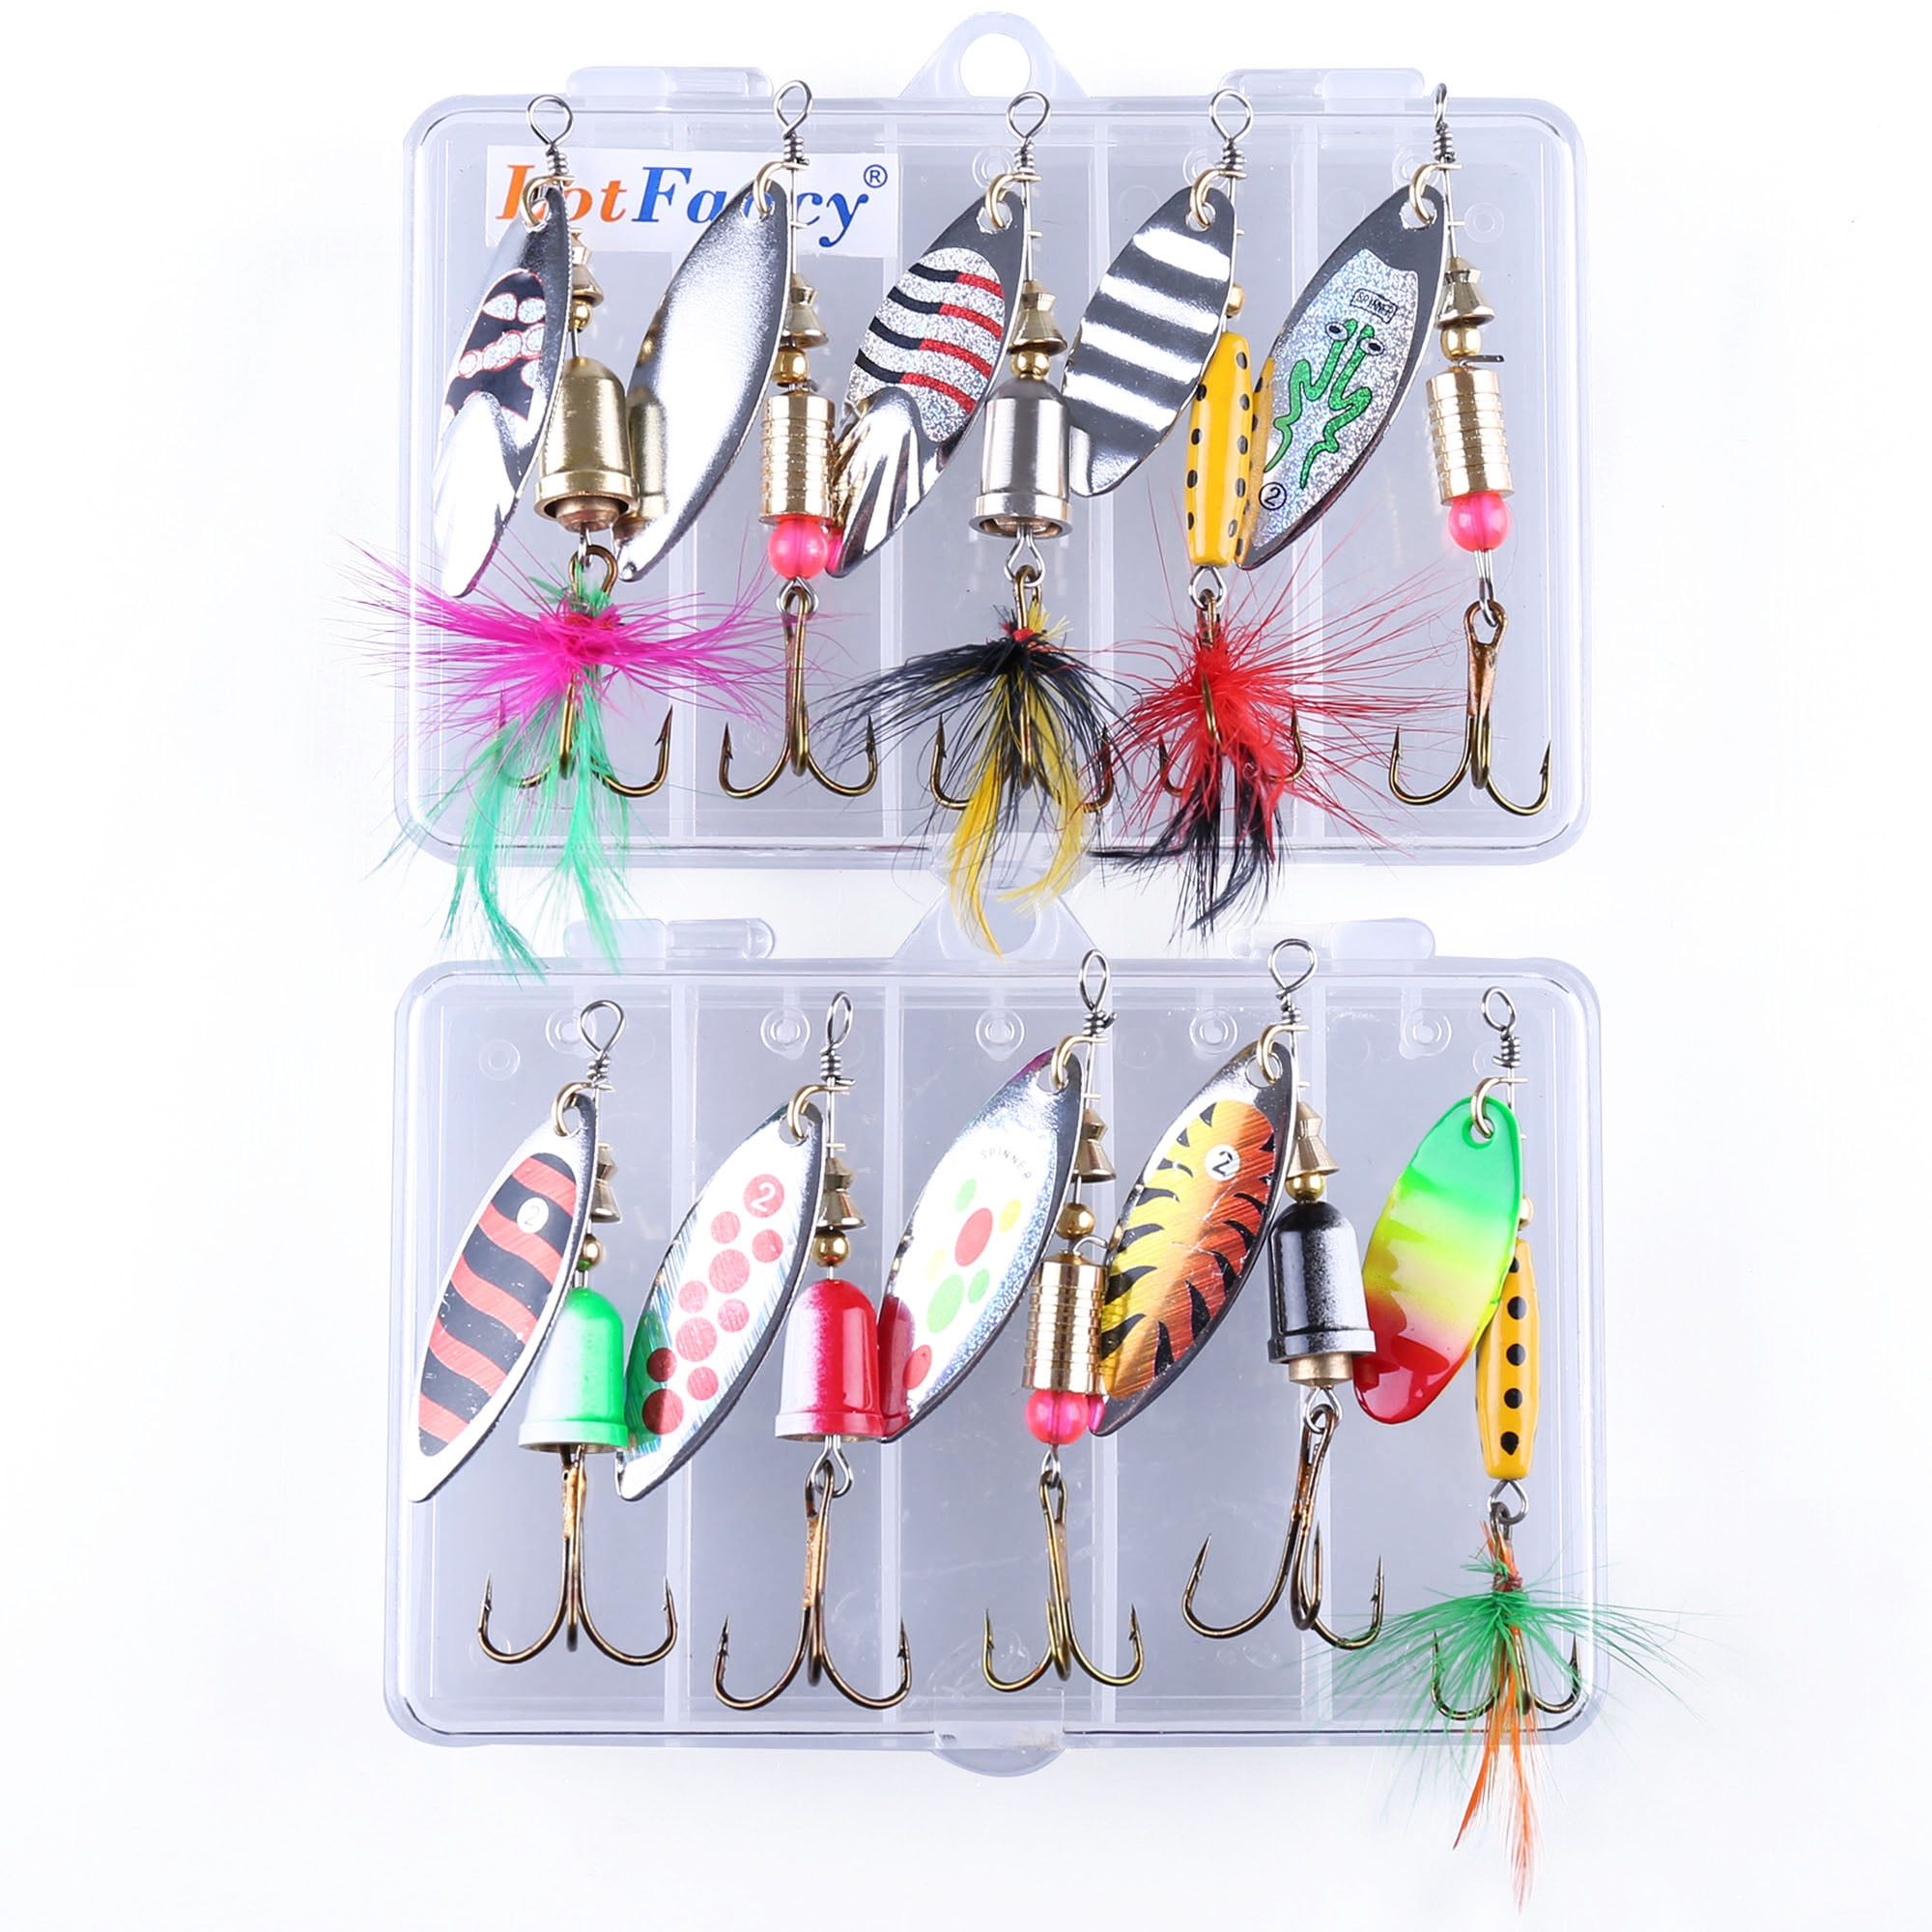  FREE FISHER 6 Pcs Fishing Lures Spinner Baits for Bass Fishing,Trout  Salmon Hard Metal Spinnerbaits : Fishing Spinners And Spinnerbaits : Sports  & Outdoors